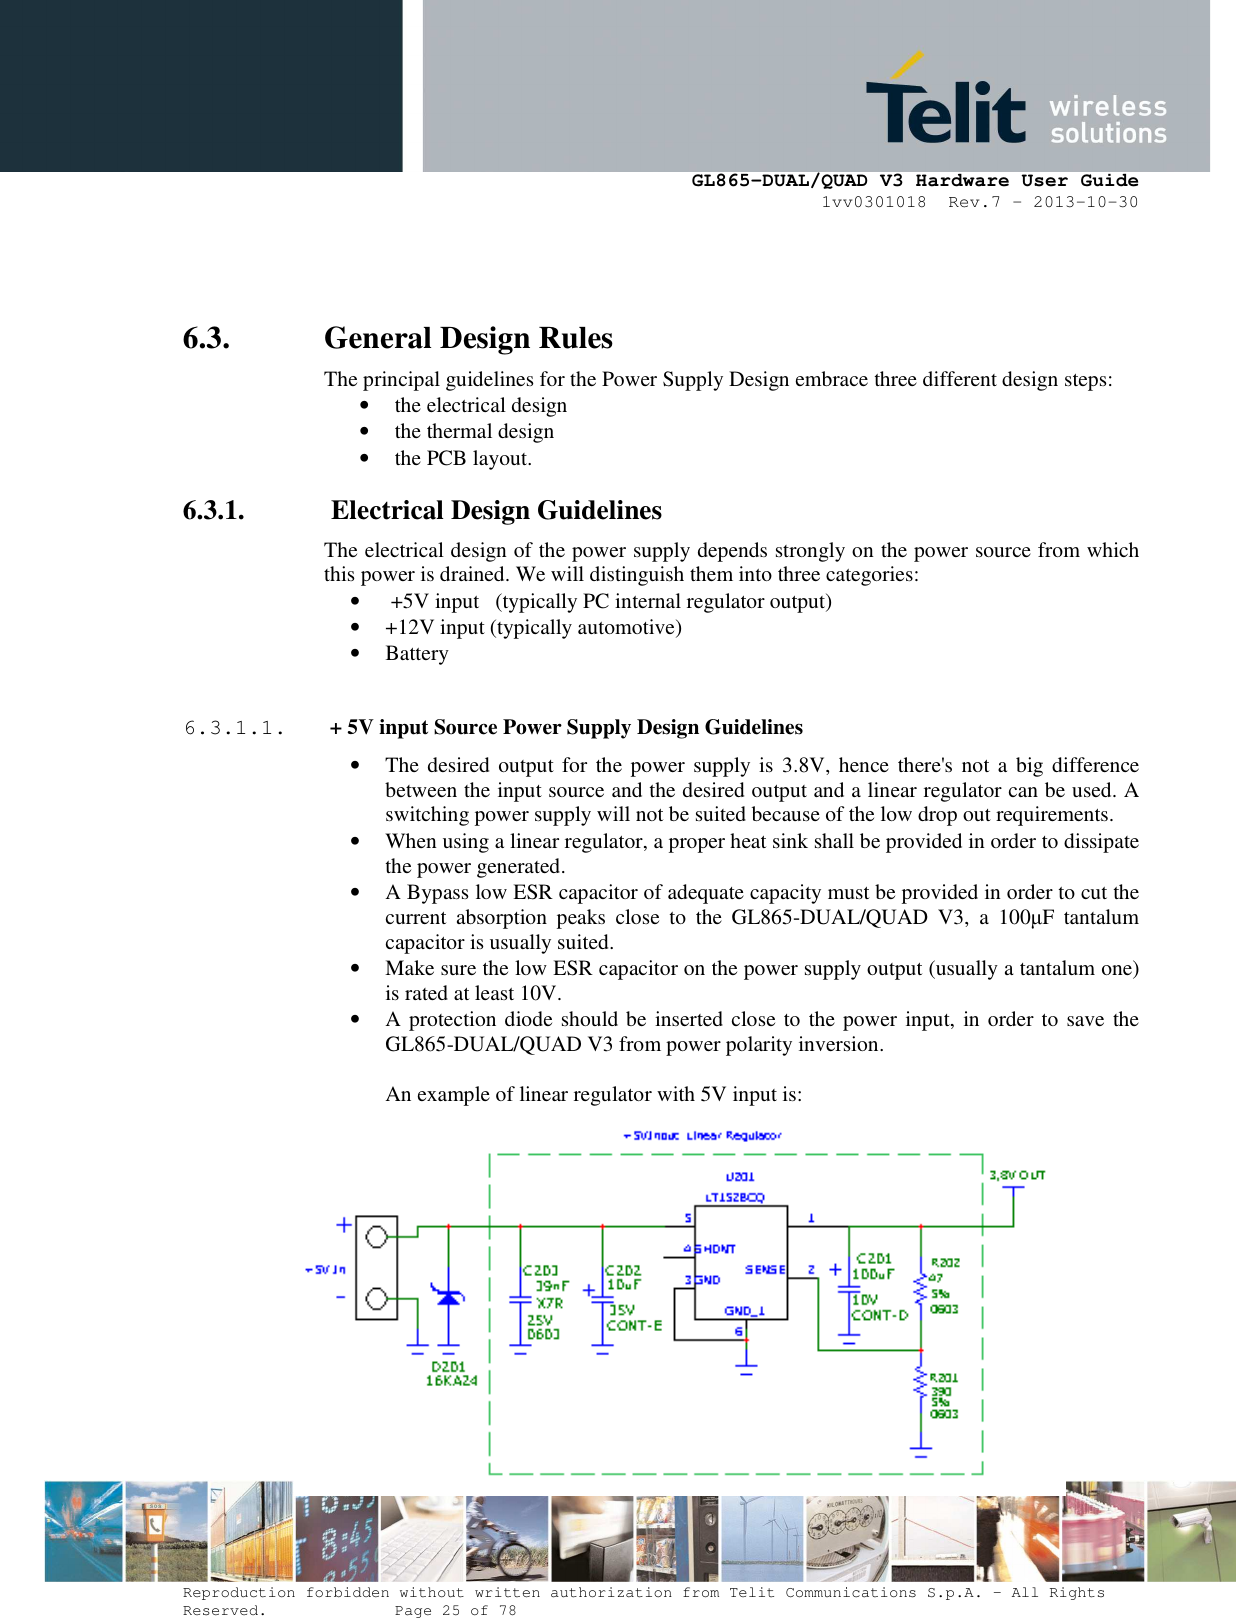      GL865-DUAL/QUAD V3 Hardware User Guide 1vv0301018  Rev.7 – 2013-10-30  Reproduction forbidden without written authorization from Telit Communications S.p.A. - All Rights Reserved.    Page 25 of 78 Mod. 0805 2011-07 Rev.2  6.3. General Design Rules The principal guidelines for the Power Supply Design embrace three different design steps: • the electrical design • the thermal design • the PCB layout. 6.3.1.  Electrical Design Guidelines The electrical design of the power supply depends strongly on the power source from which this power is drained. We will distinguish them into three categories: •  +5V input   (typically PC internal regulator output) • +12V input (typically automotive) • Battery  6.3.1.1.  + 5V input Source Power Supply Design Guidelines • The desired output for the power  supply is  3.8V,  hence there&apos;s  not a big difference between the input source and the desired output and a linear regulator can be used. A switching power supply will not be suited because of the low drop out requirements. • When using a linear regulator, a proper heat sink shall be provided in order to dissipate the power generated. • A Bypass low ESR capacitor of adequate capacity must be provided in order to cut the current  absorption  peaks  close  to  the  GL865-DUAL/QUAD  V3,  a  100µF  tantalum capacitor is usually suited. • Make sure the low ESR capacitor on the power supply output (usually a tantalum one) is rated at least 10V. • A protection diode should be inserted close to the power input, in order to save the GL865-DUAL/QUAD V3 from power polarity inversion.  An example of linear regulator with 5V input is:        